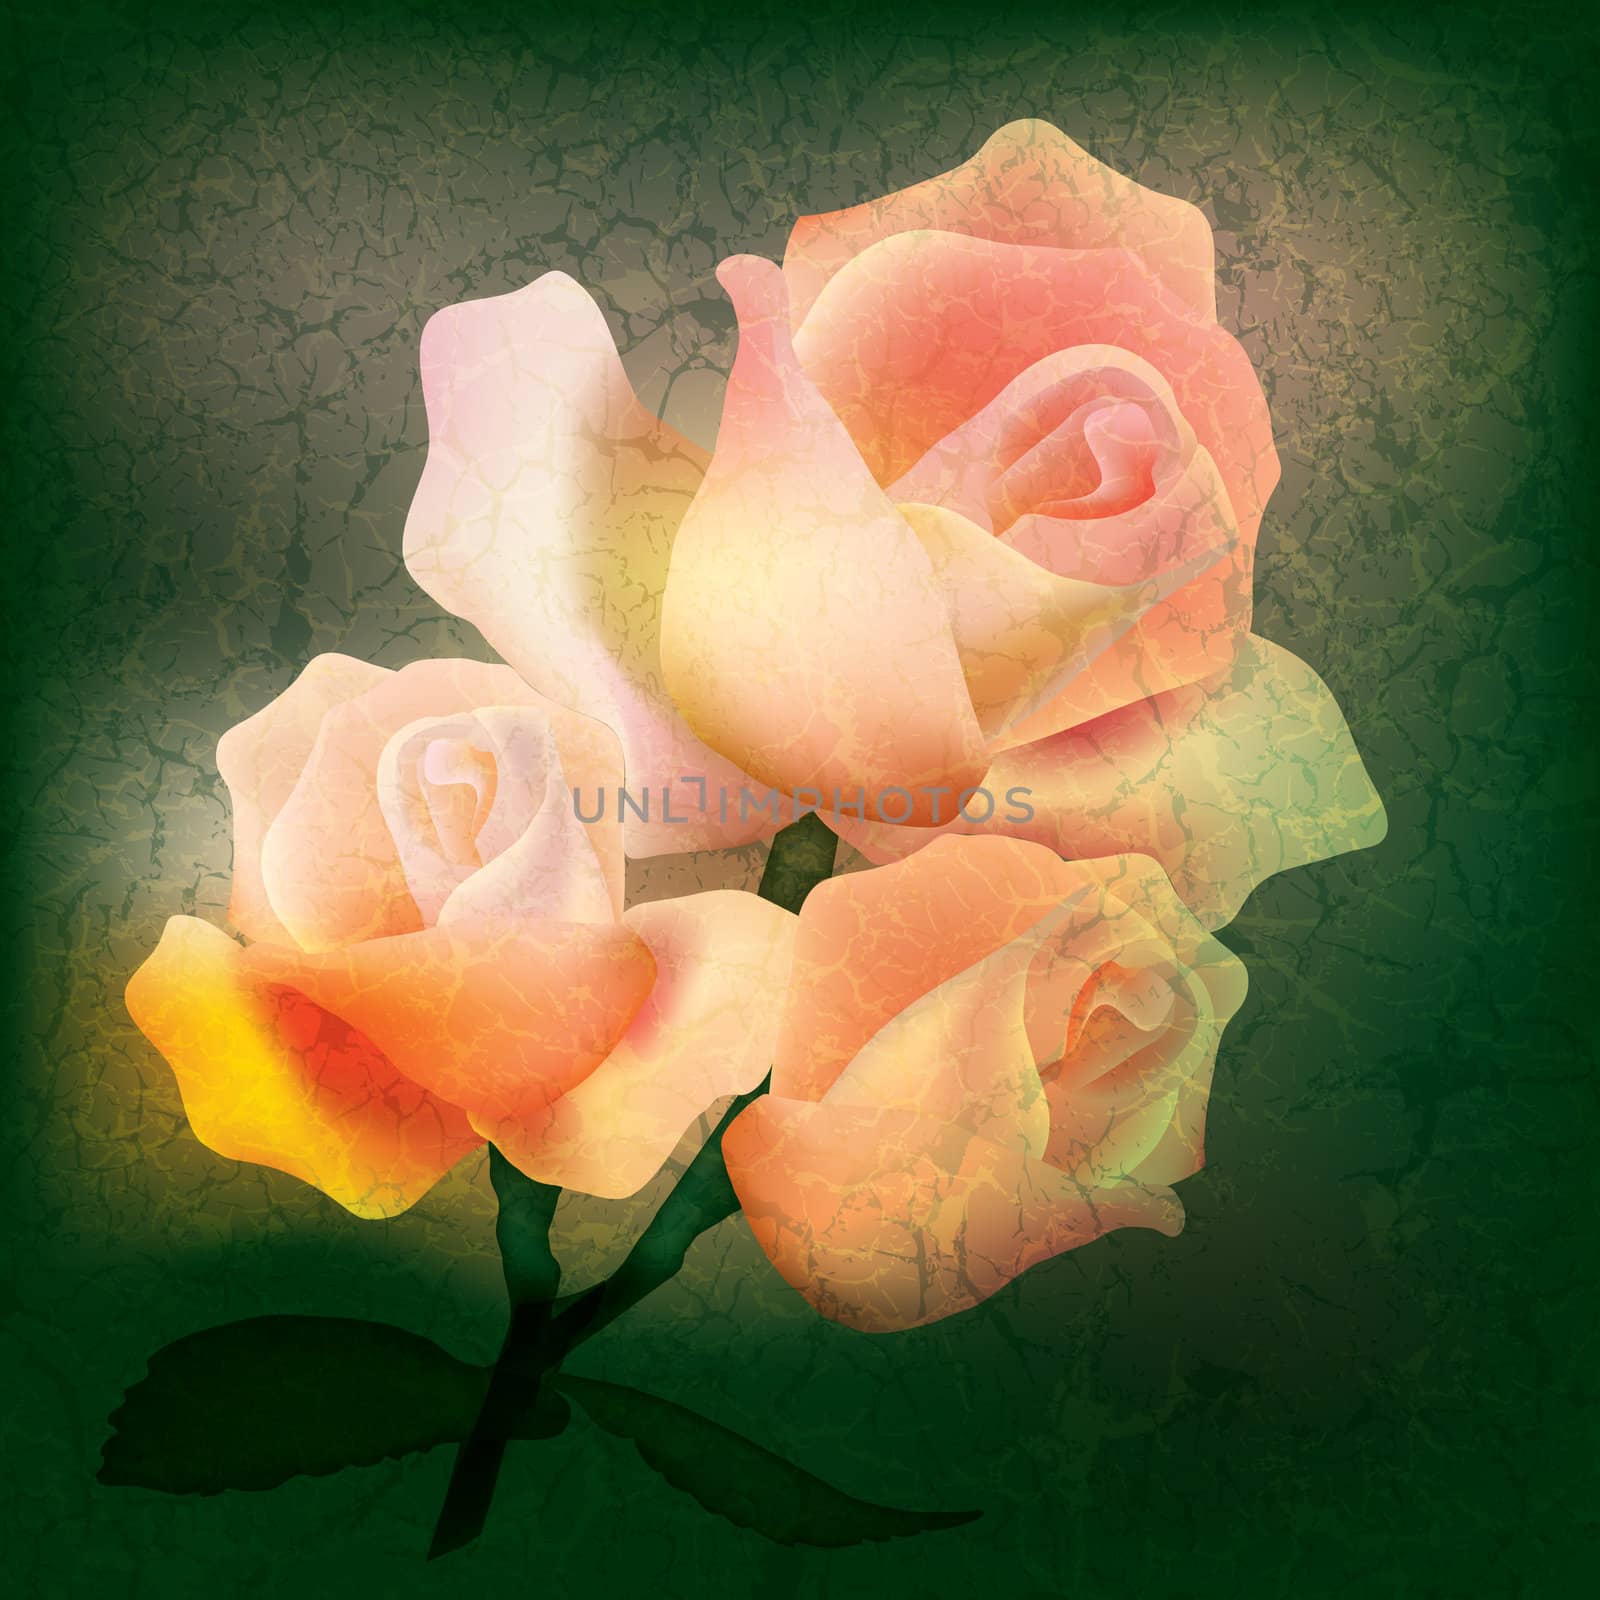 abstract floral illustration with roses on grunge background